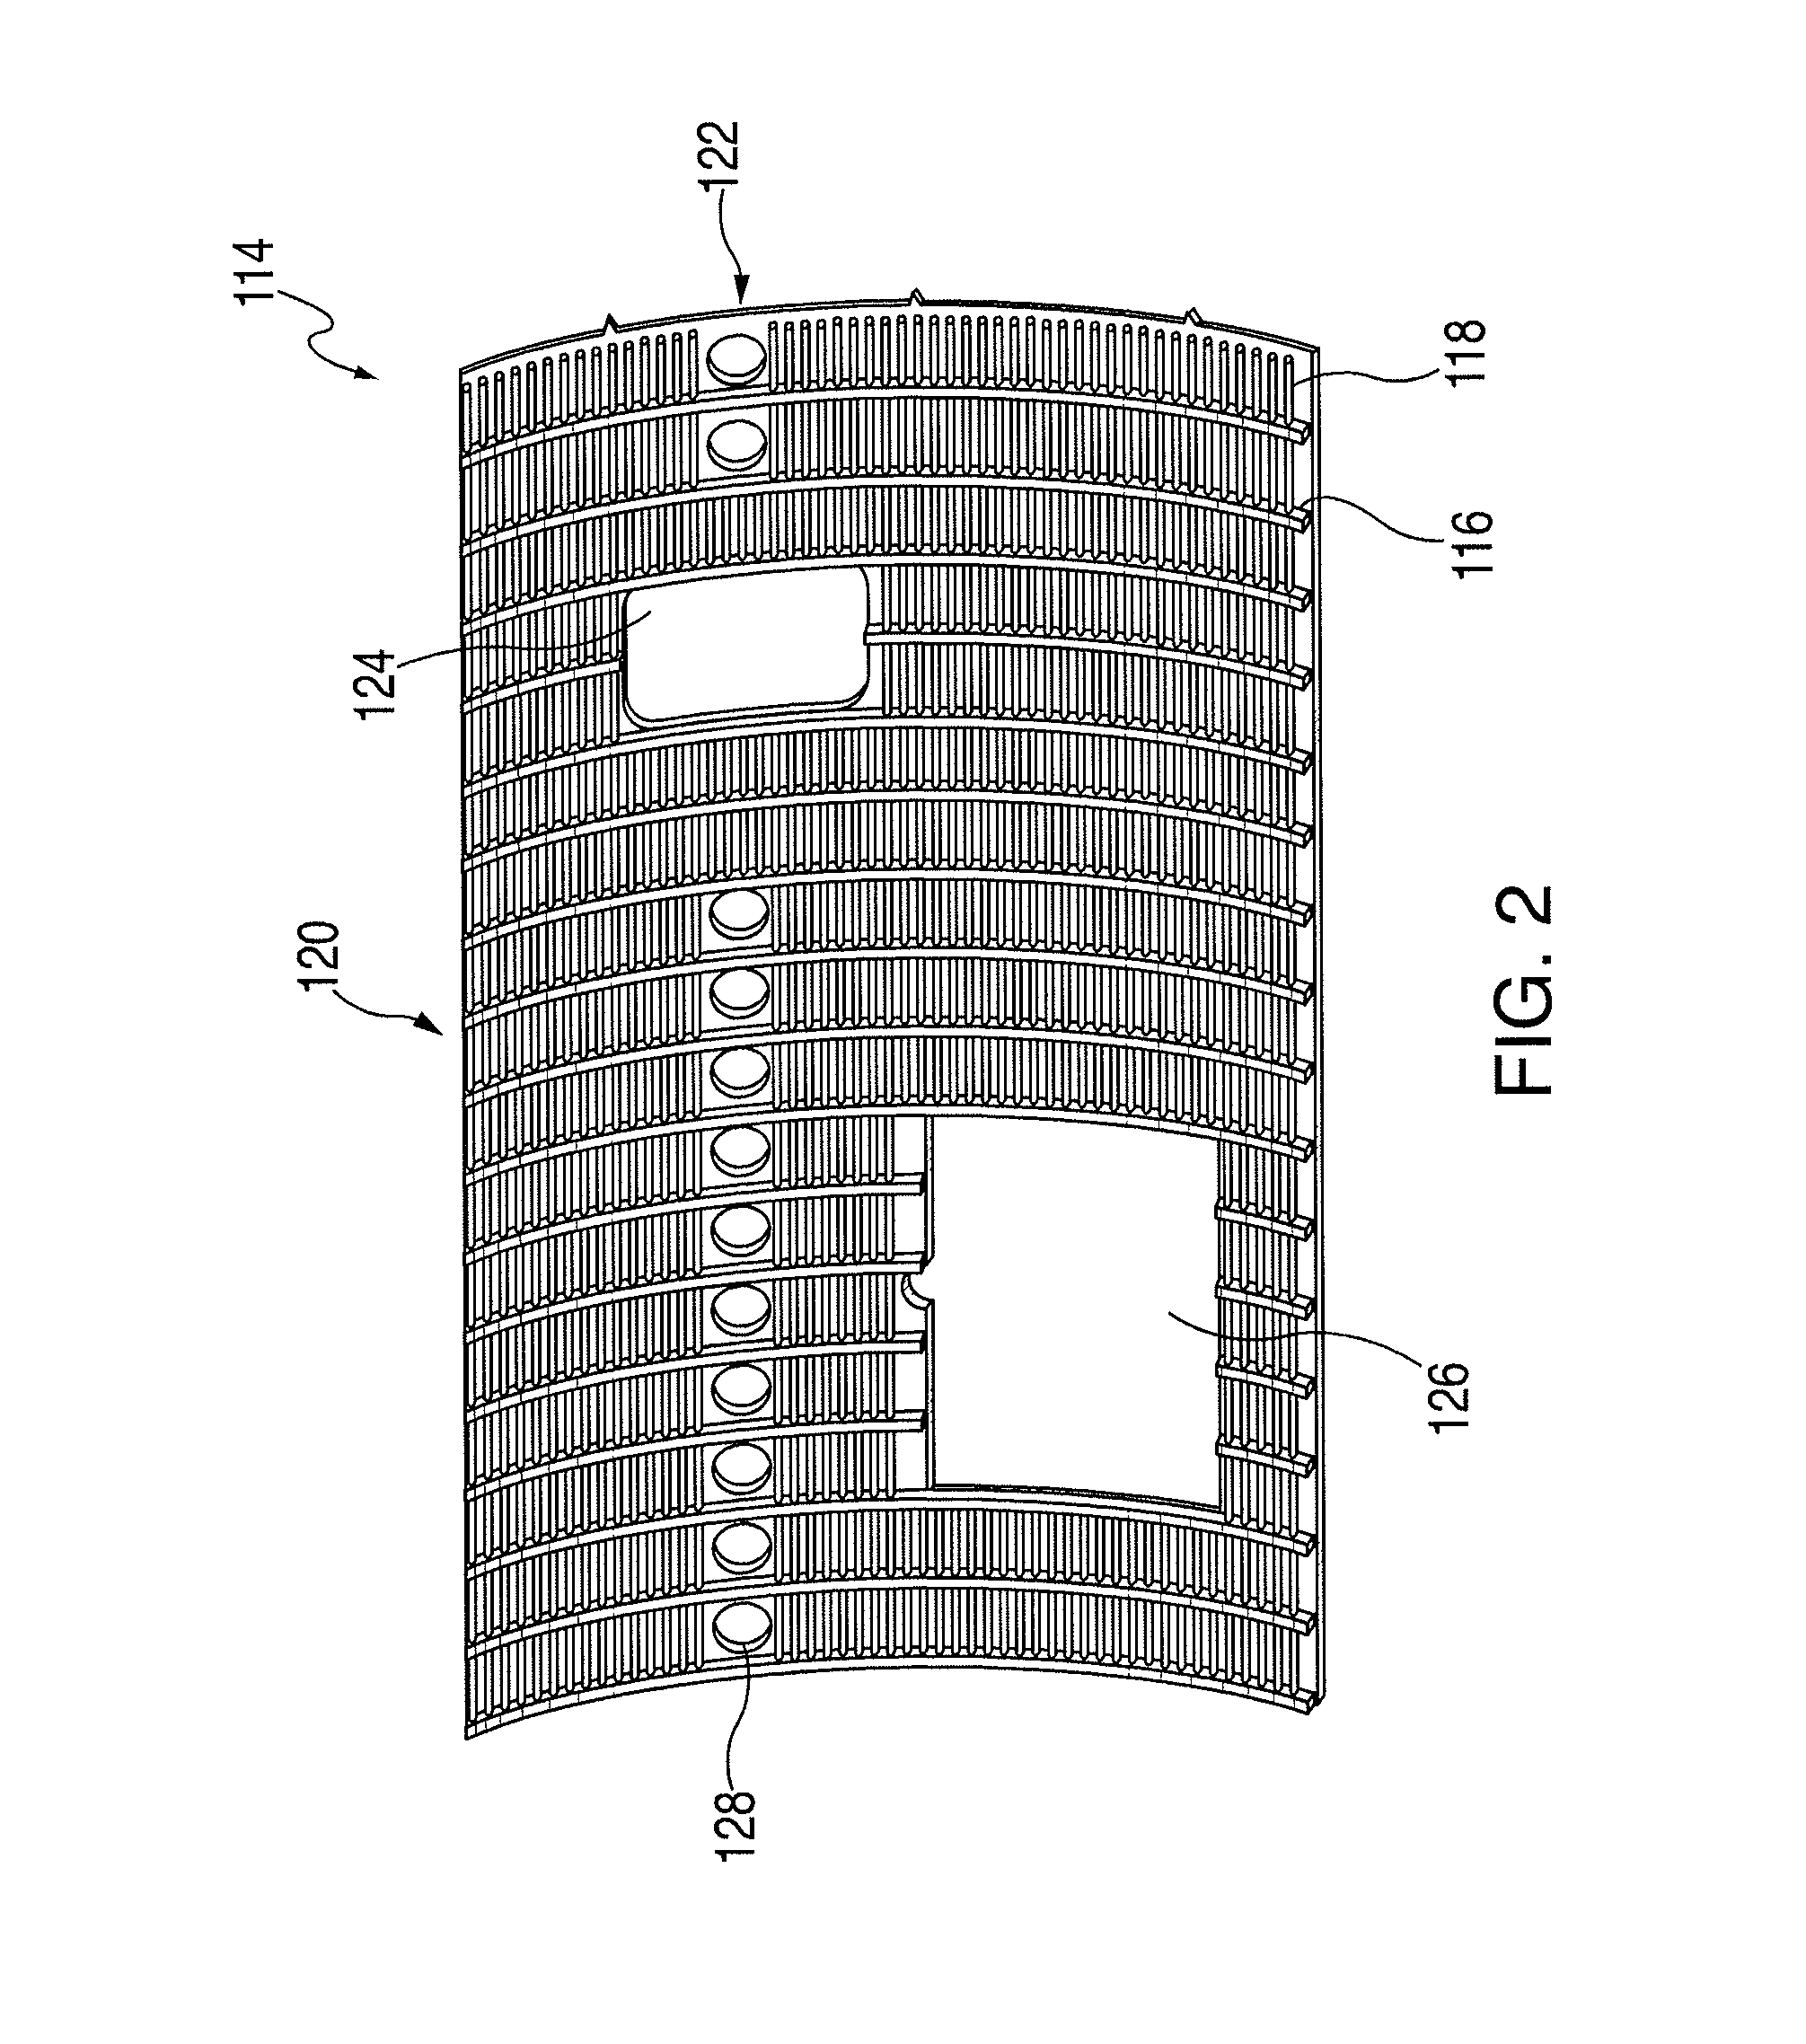 Assembly inspection system and method